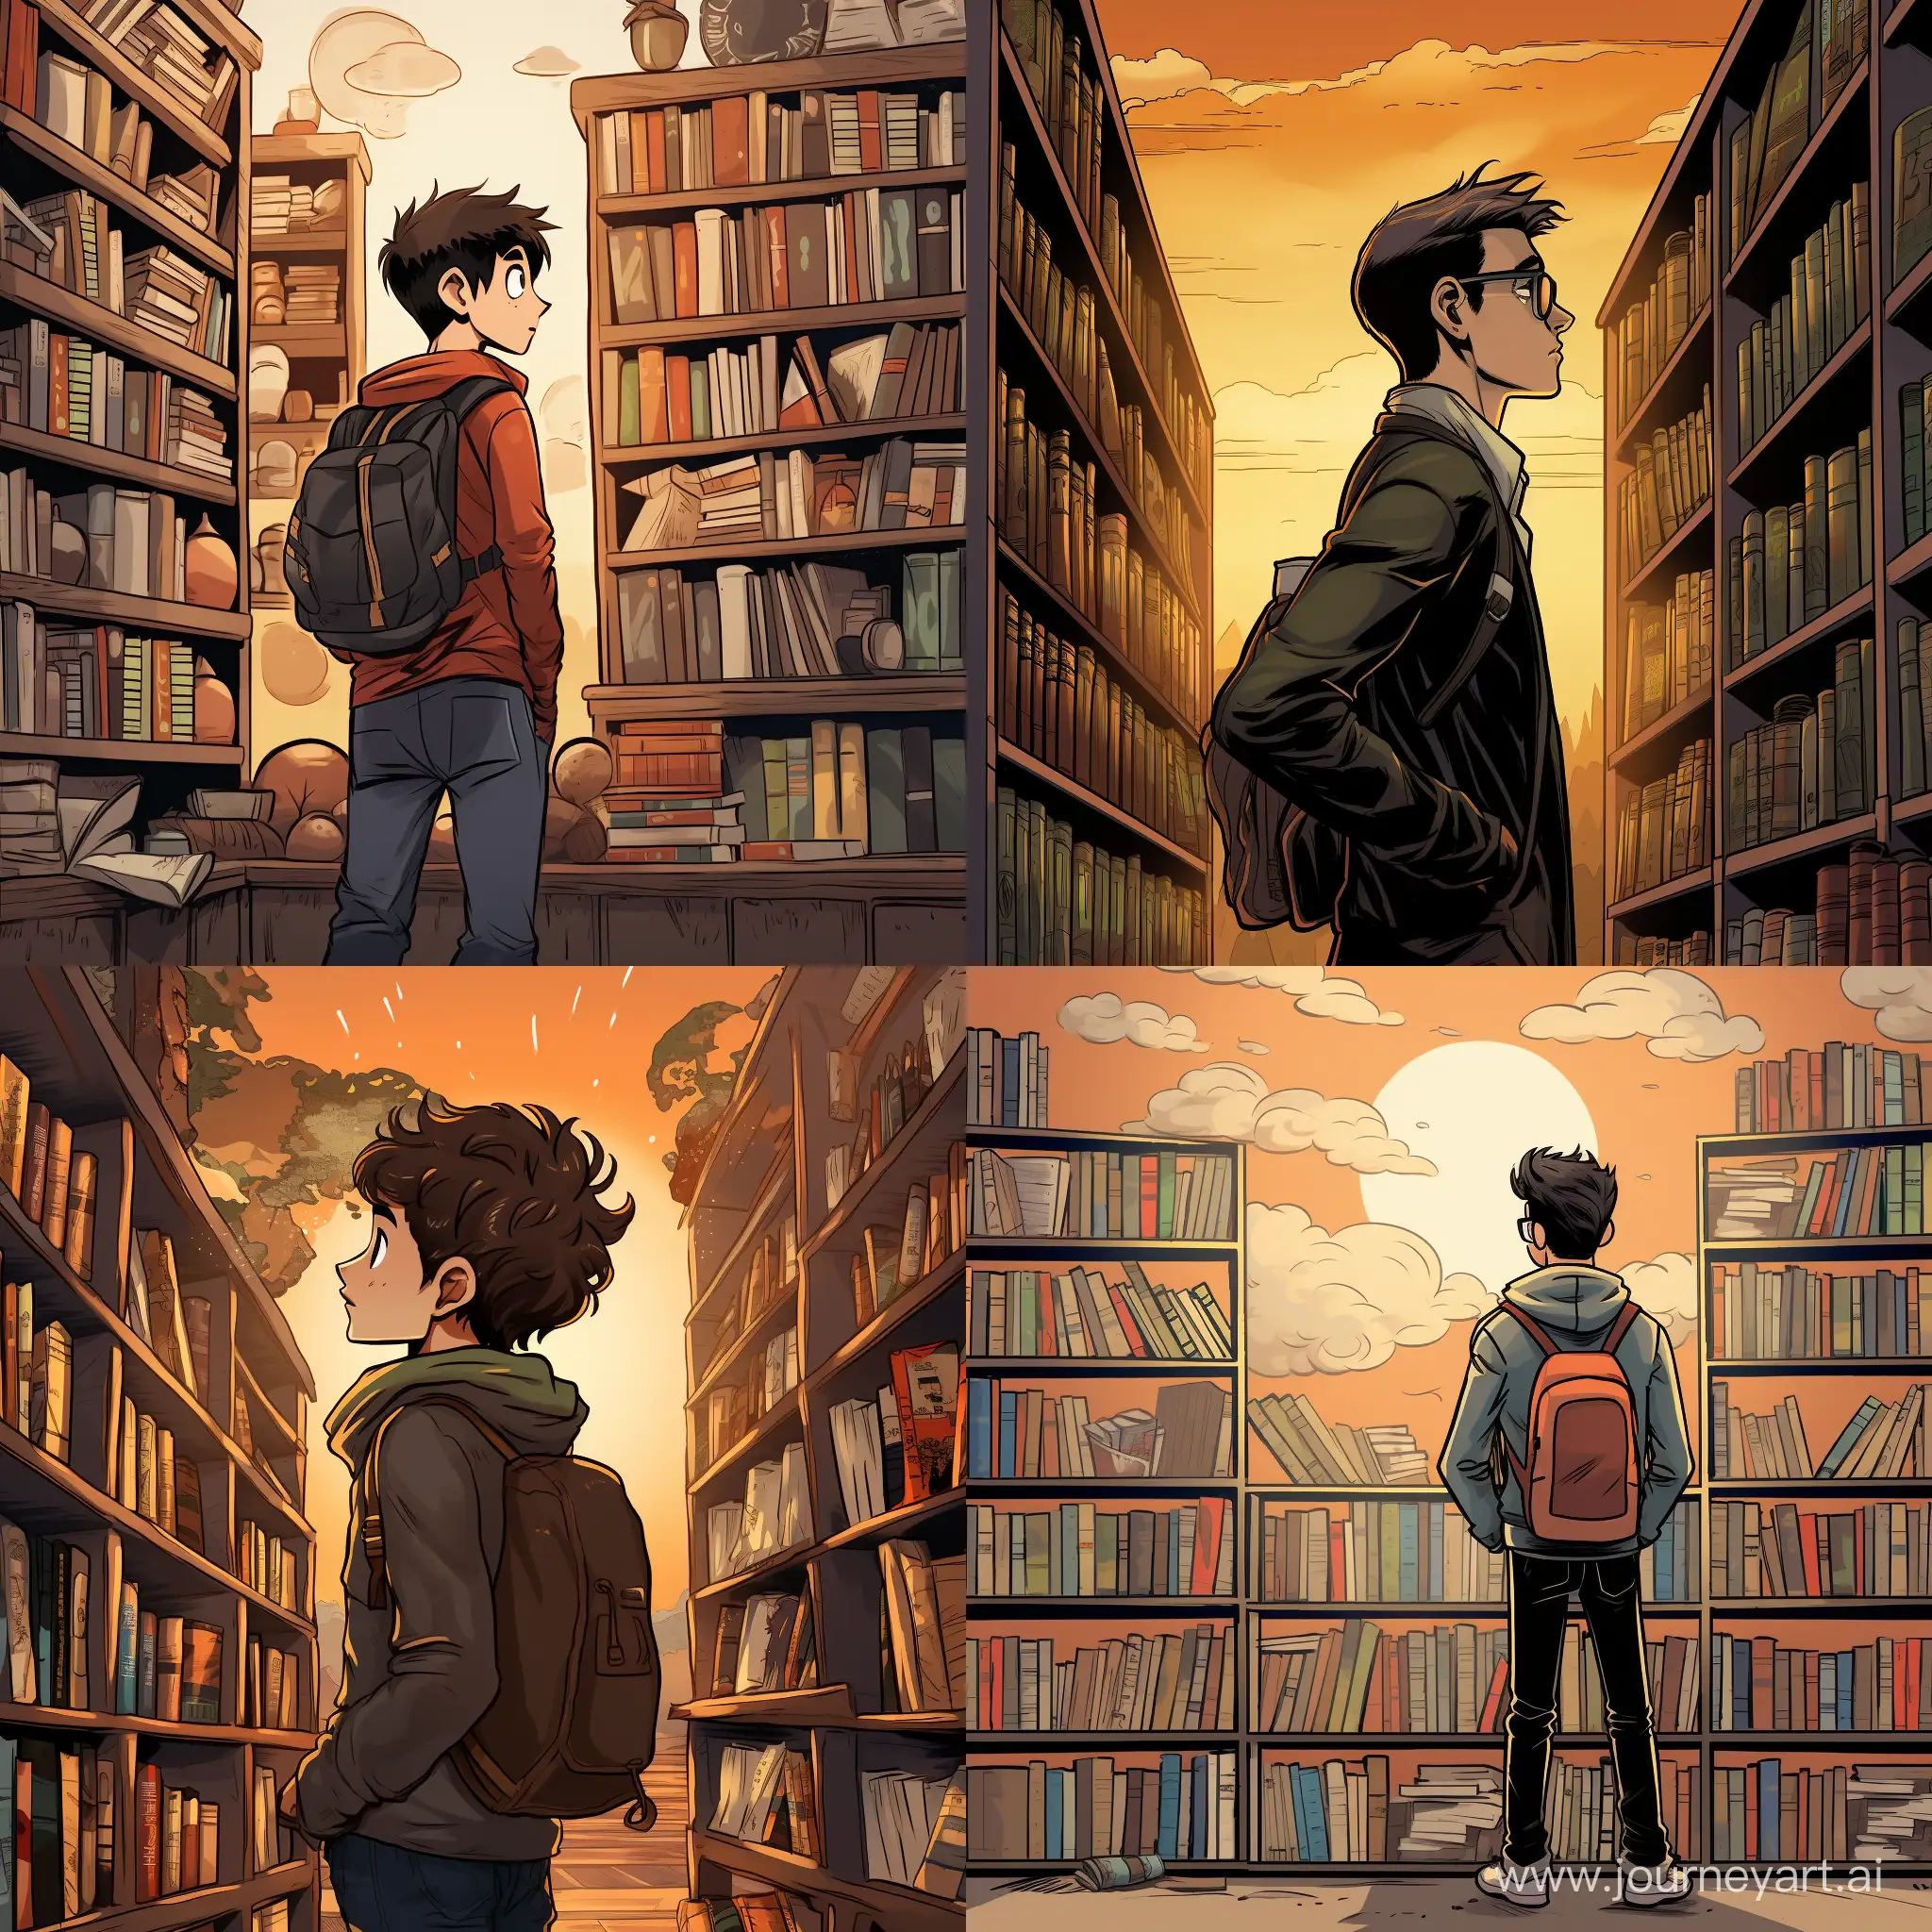 Curious-Student-Exploring-Library-Shelves-in-Comic-Style